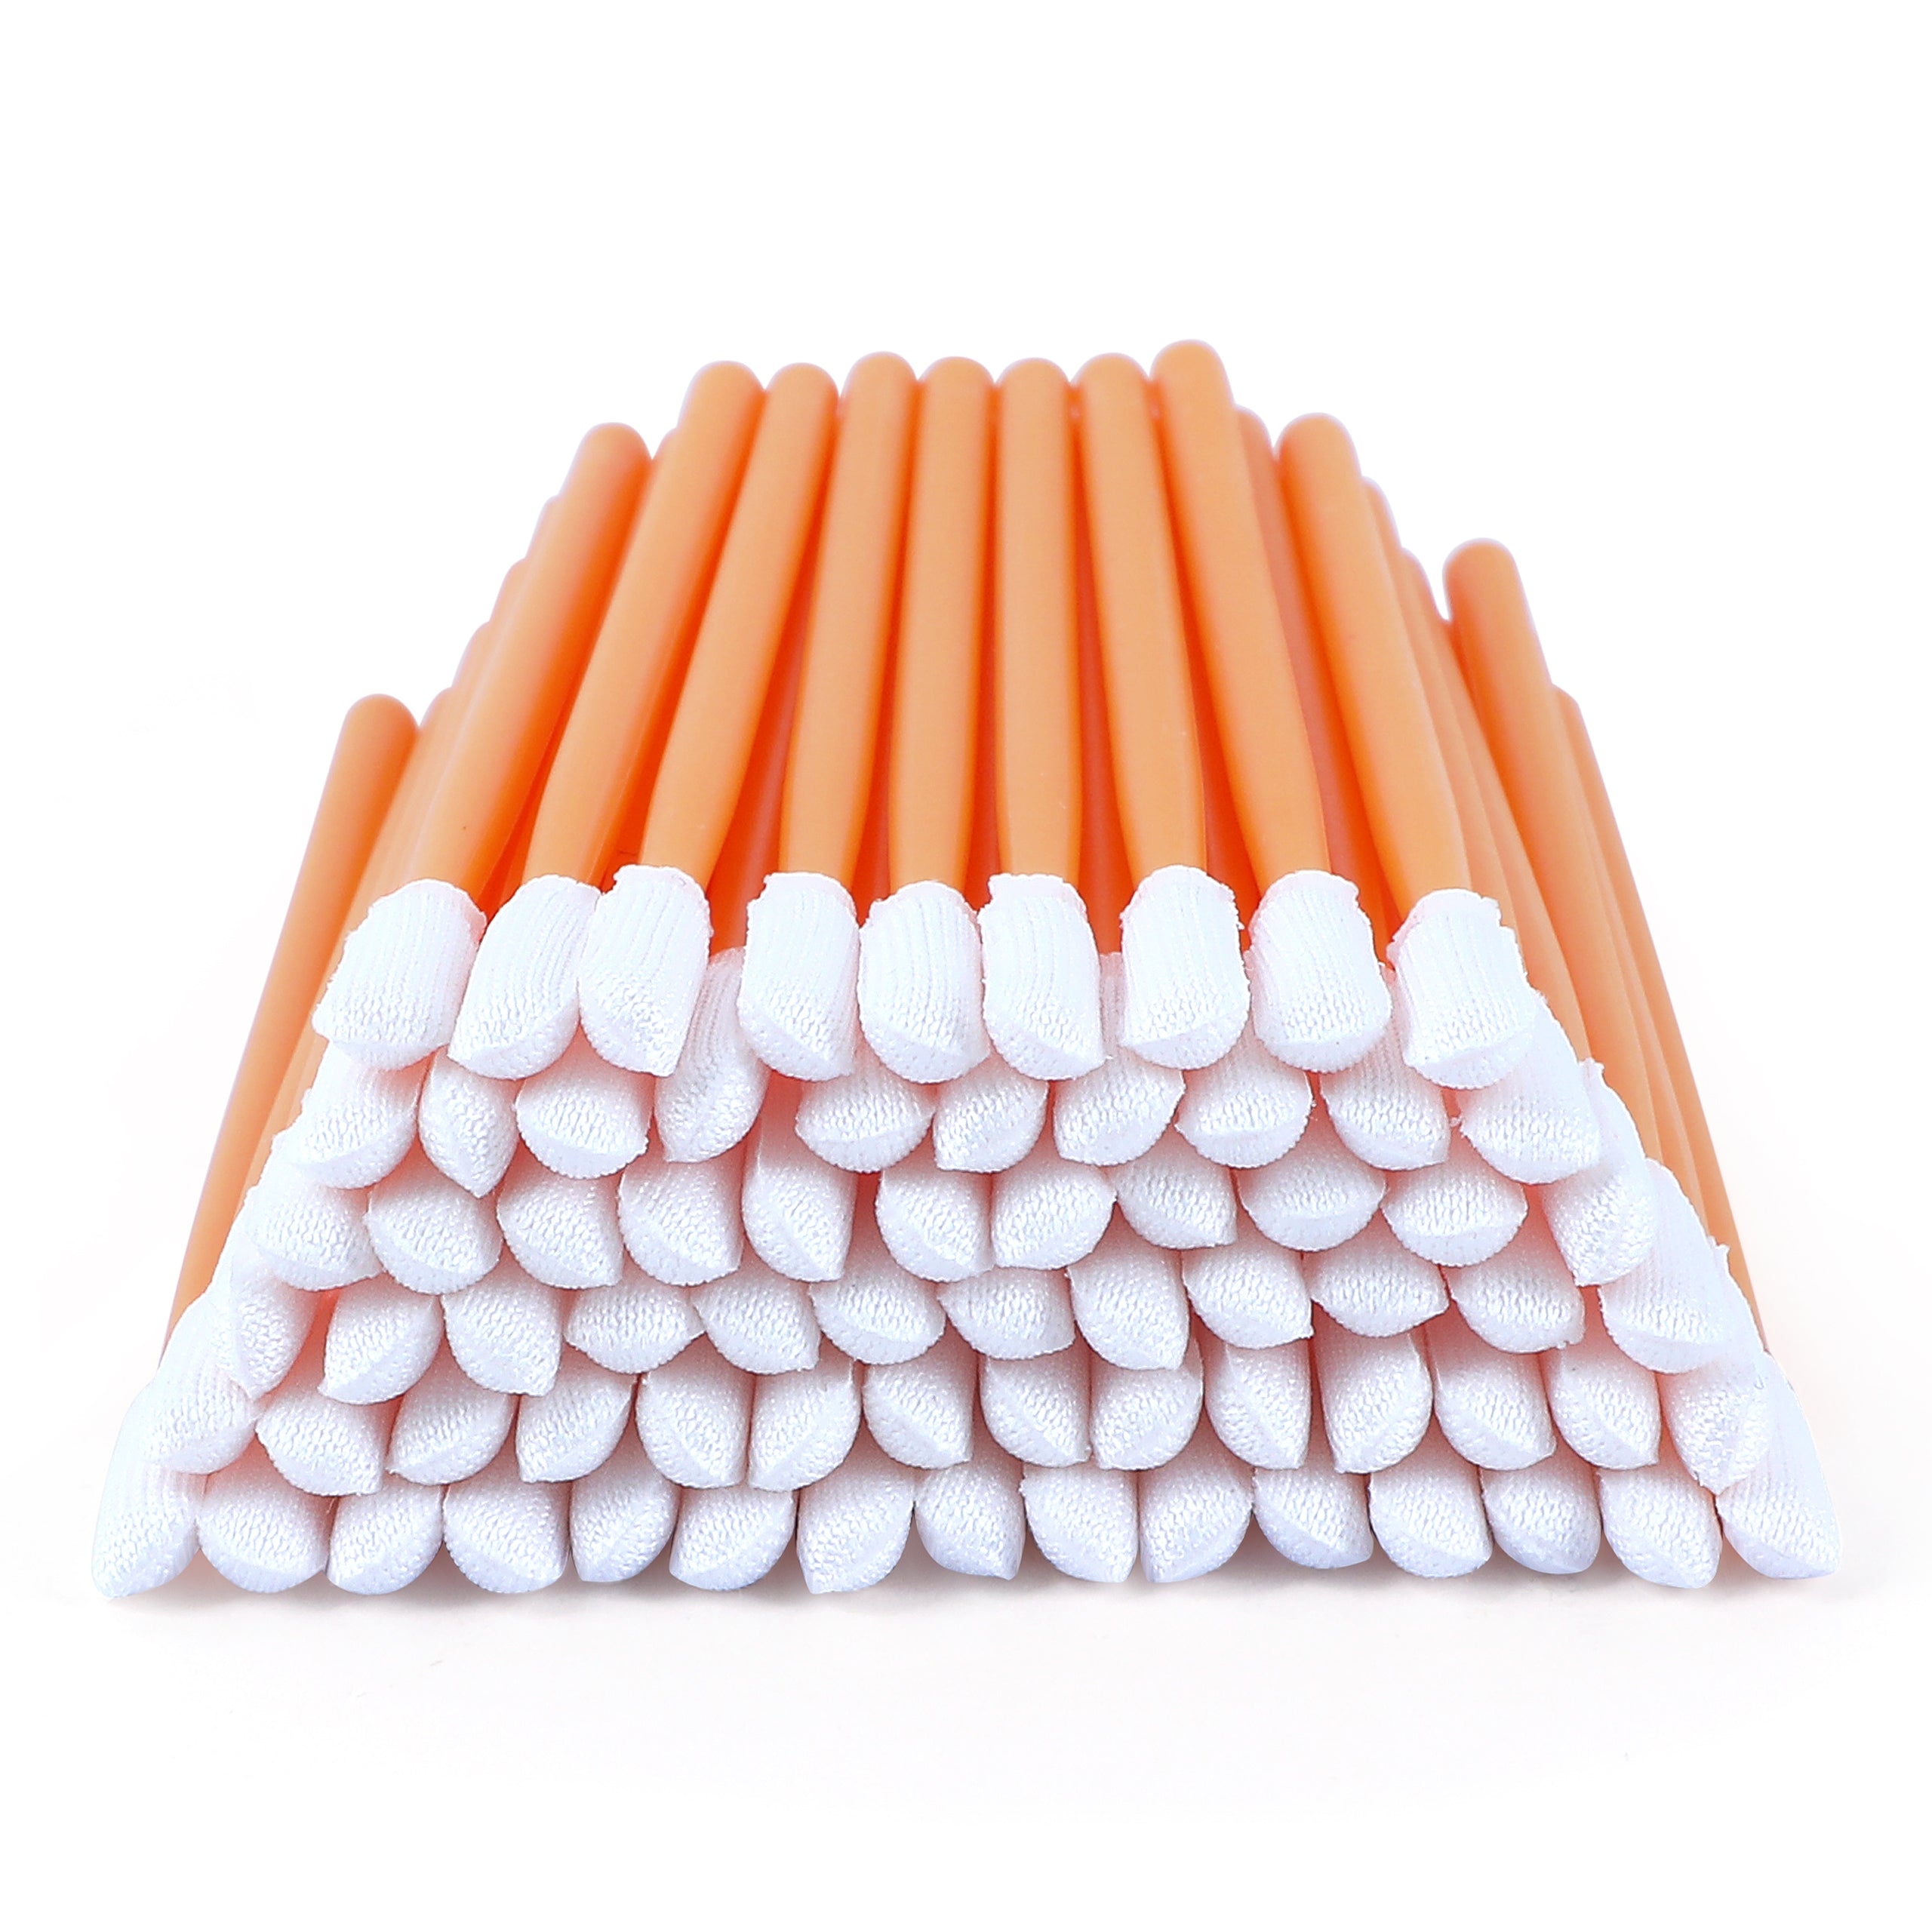 Premium microfiber cleaning swabs 2.8" (1,000 pcs, Orange, Length/ Head Width=72 mm/3.2 mm, Small Round Head) (No. A5837A)